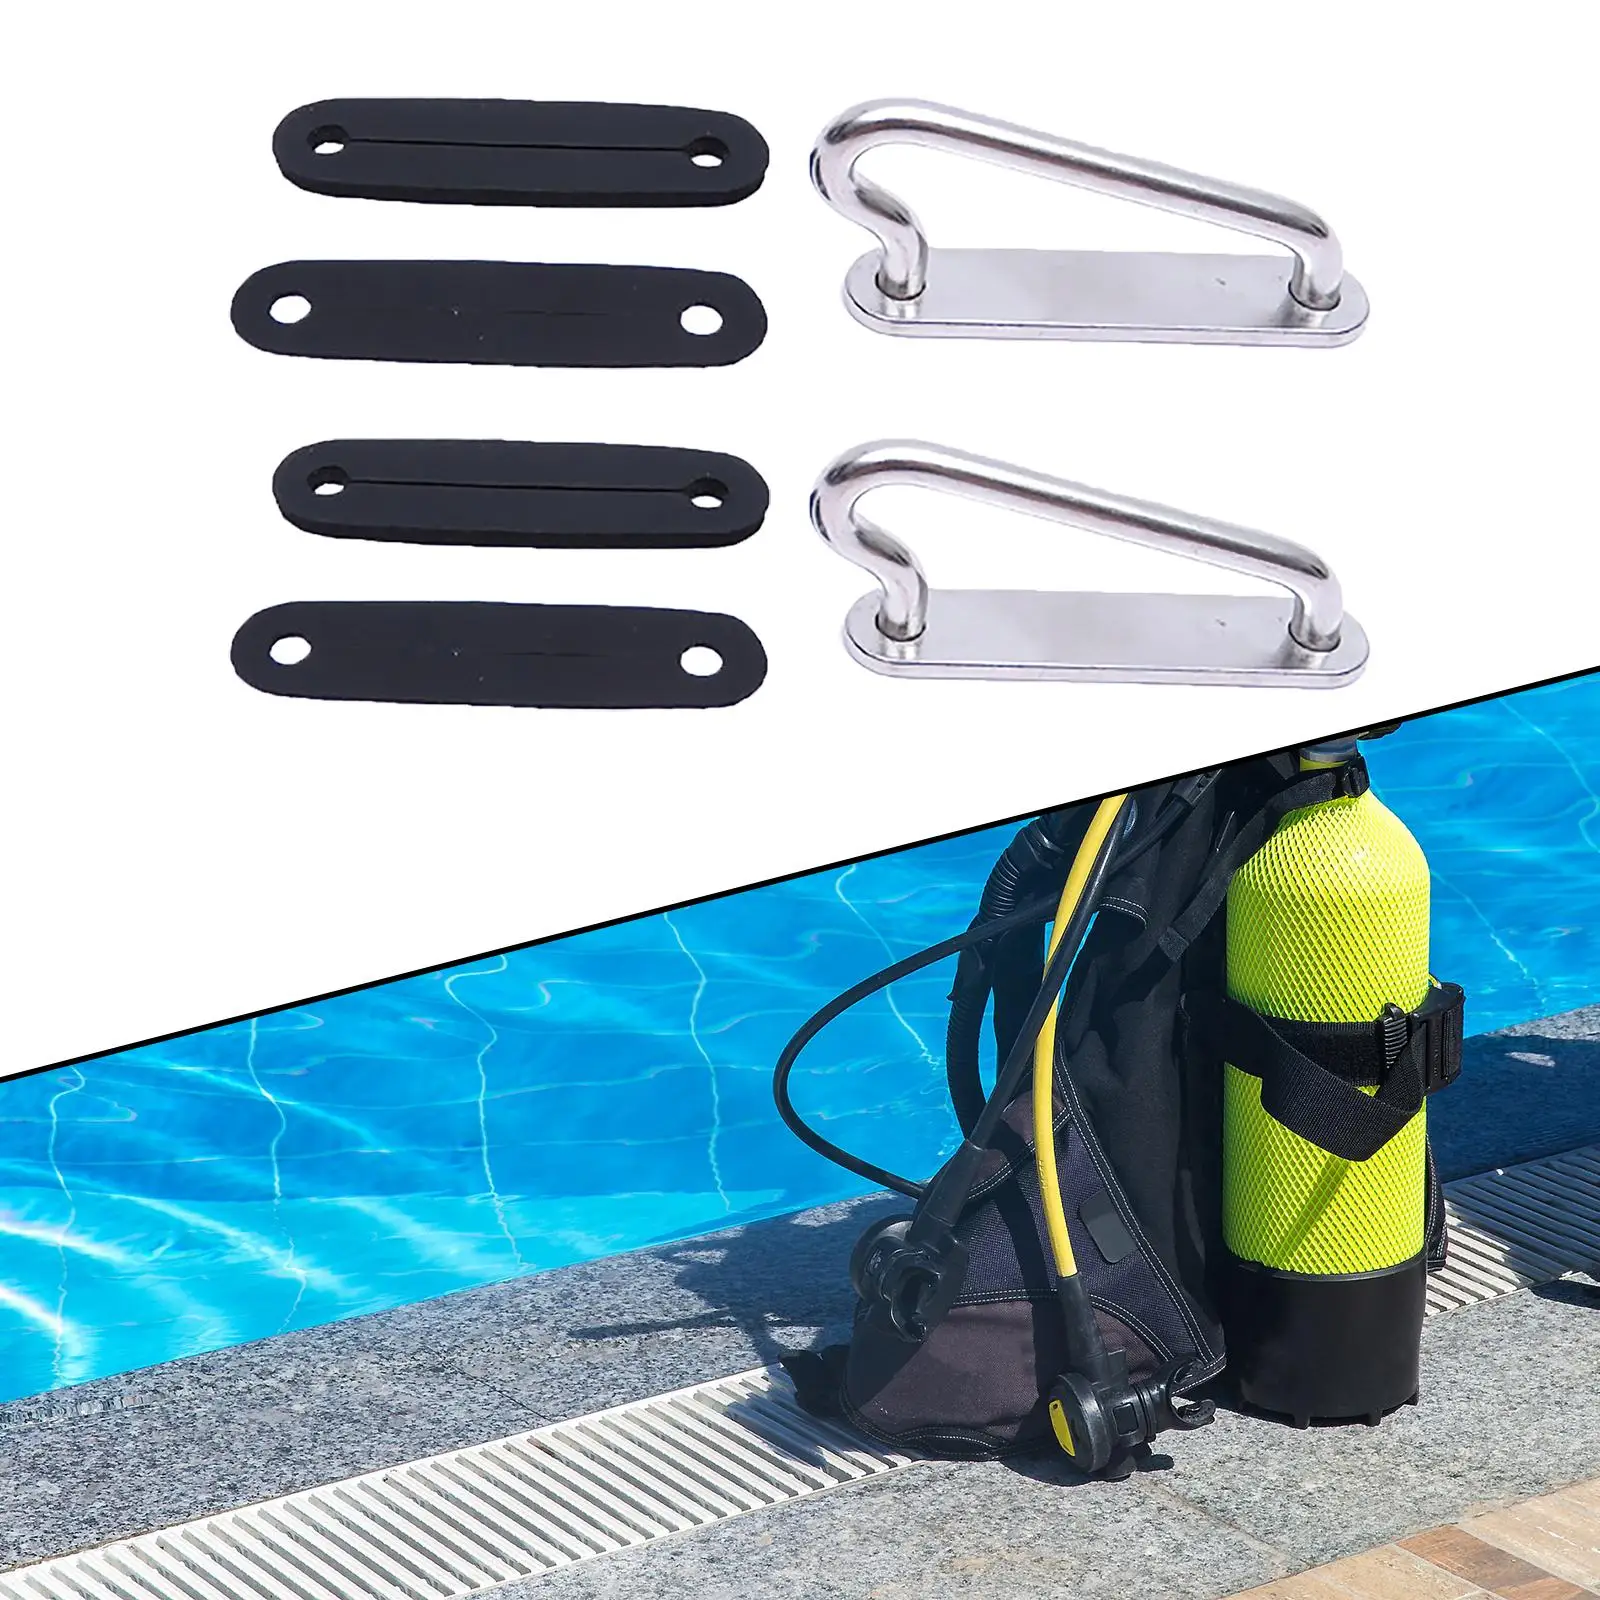 Weight  Keeper, Slider Buckle and Rubber Pad Underwater Scuba Diving Weight